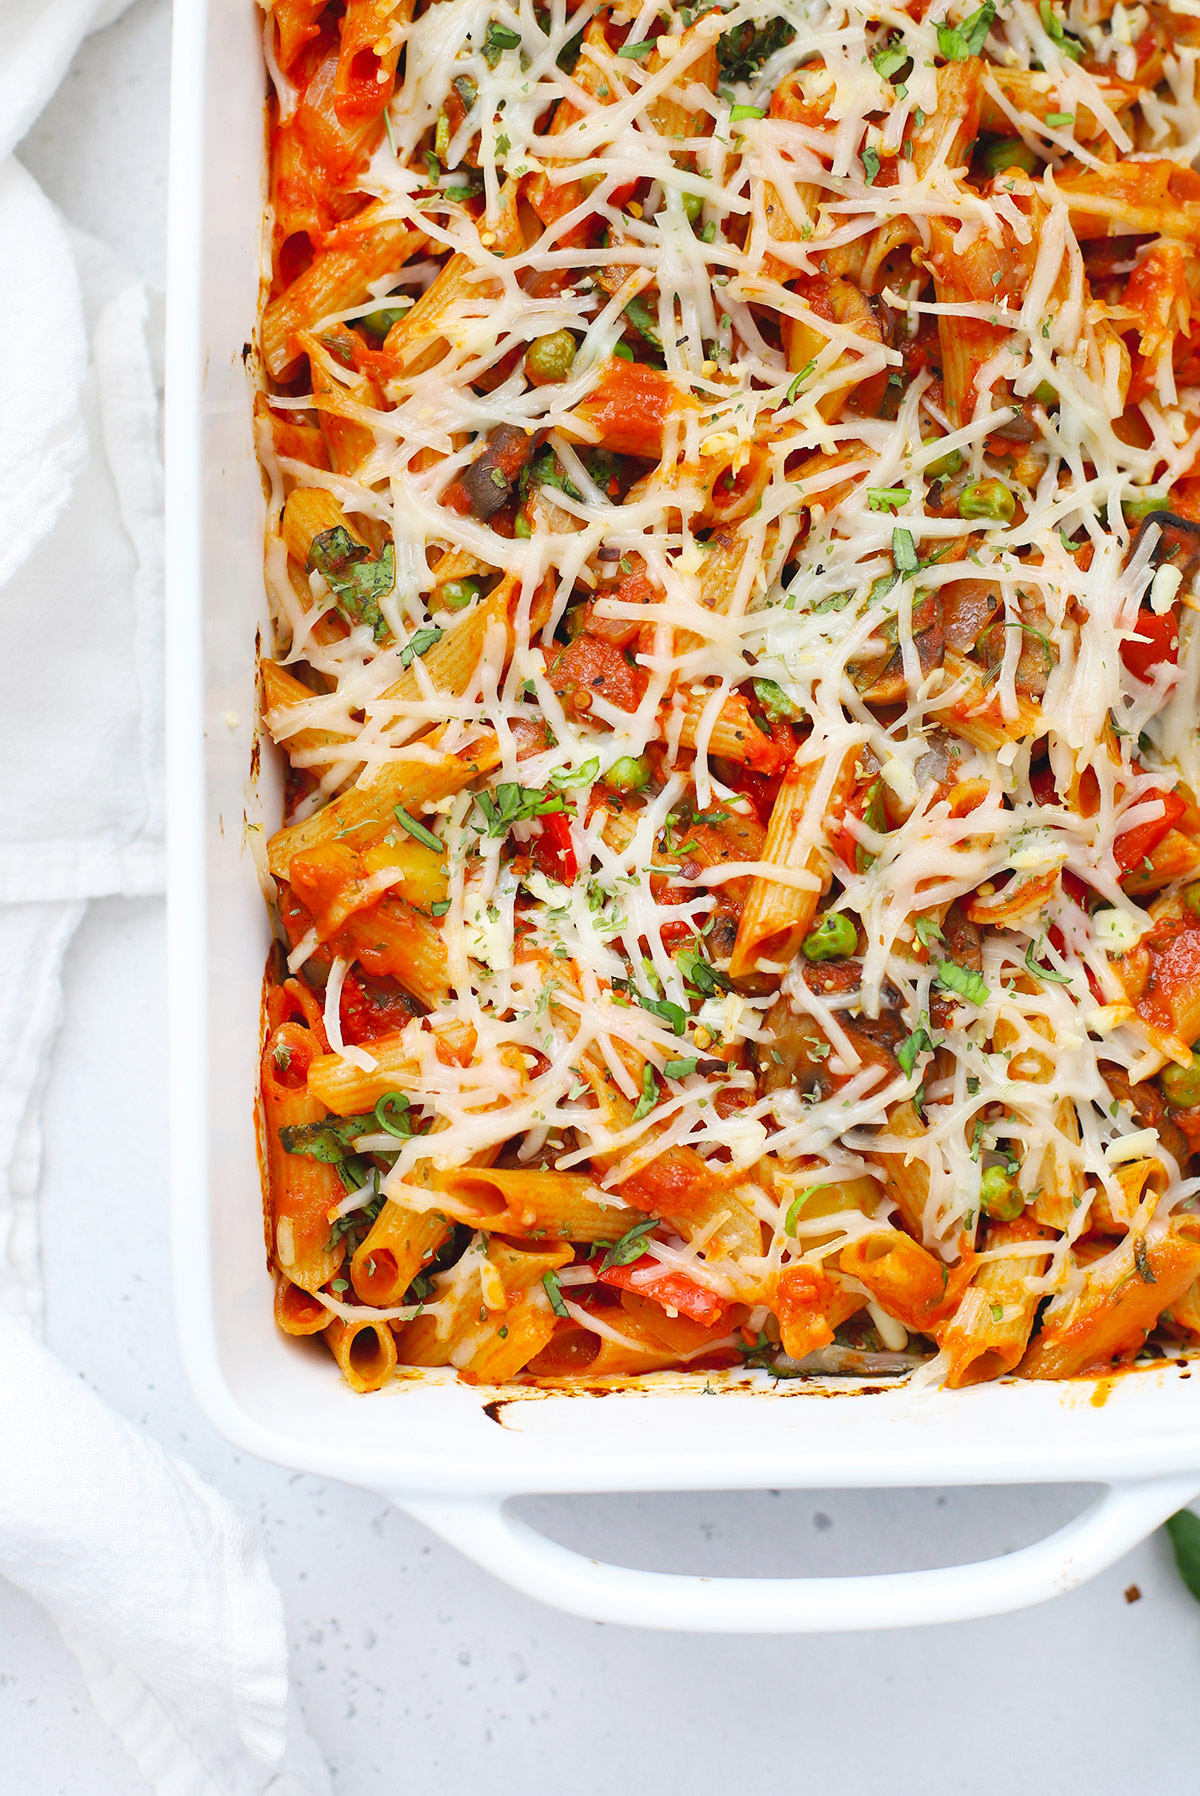 Baked Penne with Roasted Veggies (Gluten-Free Friendly)